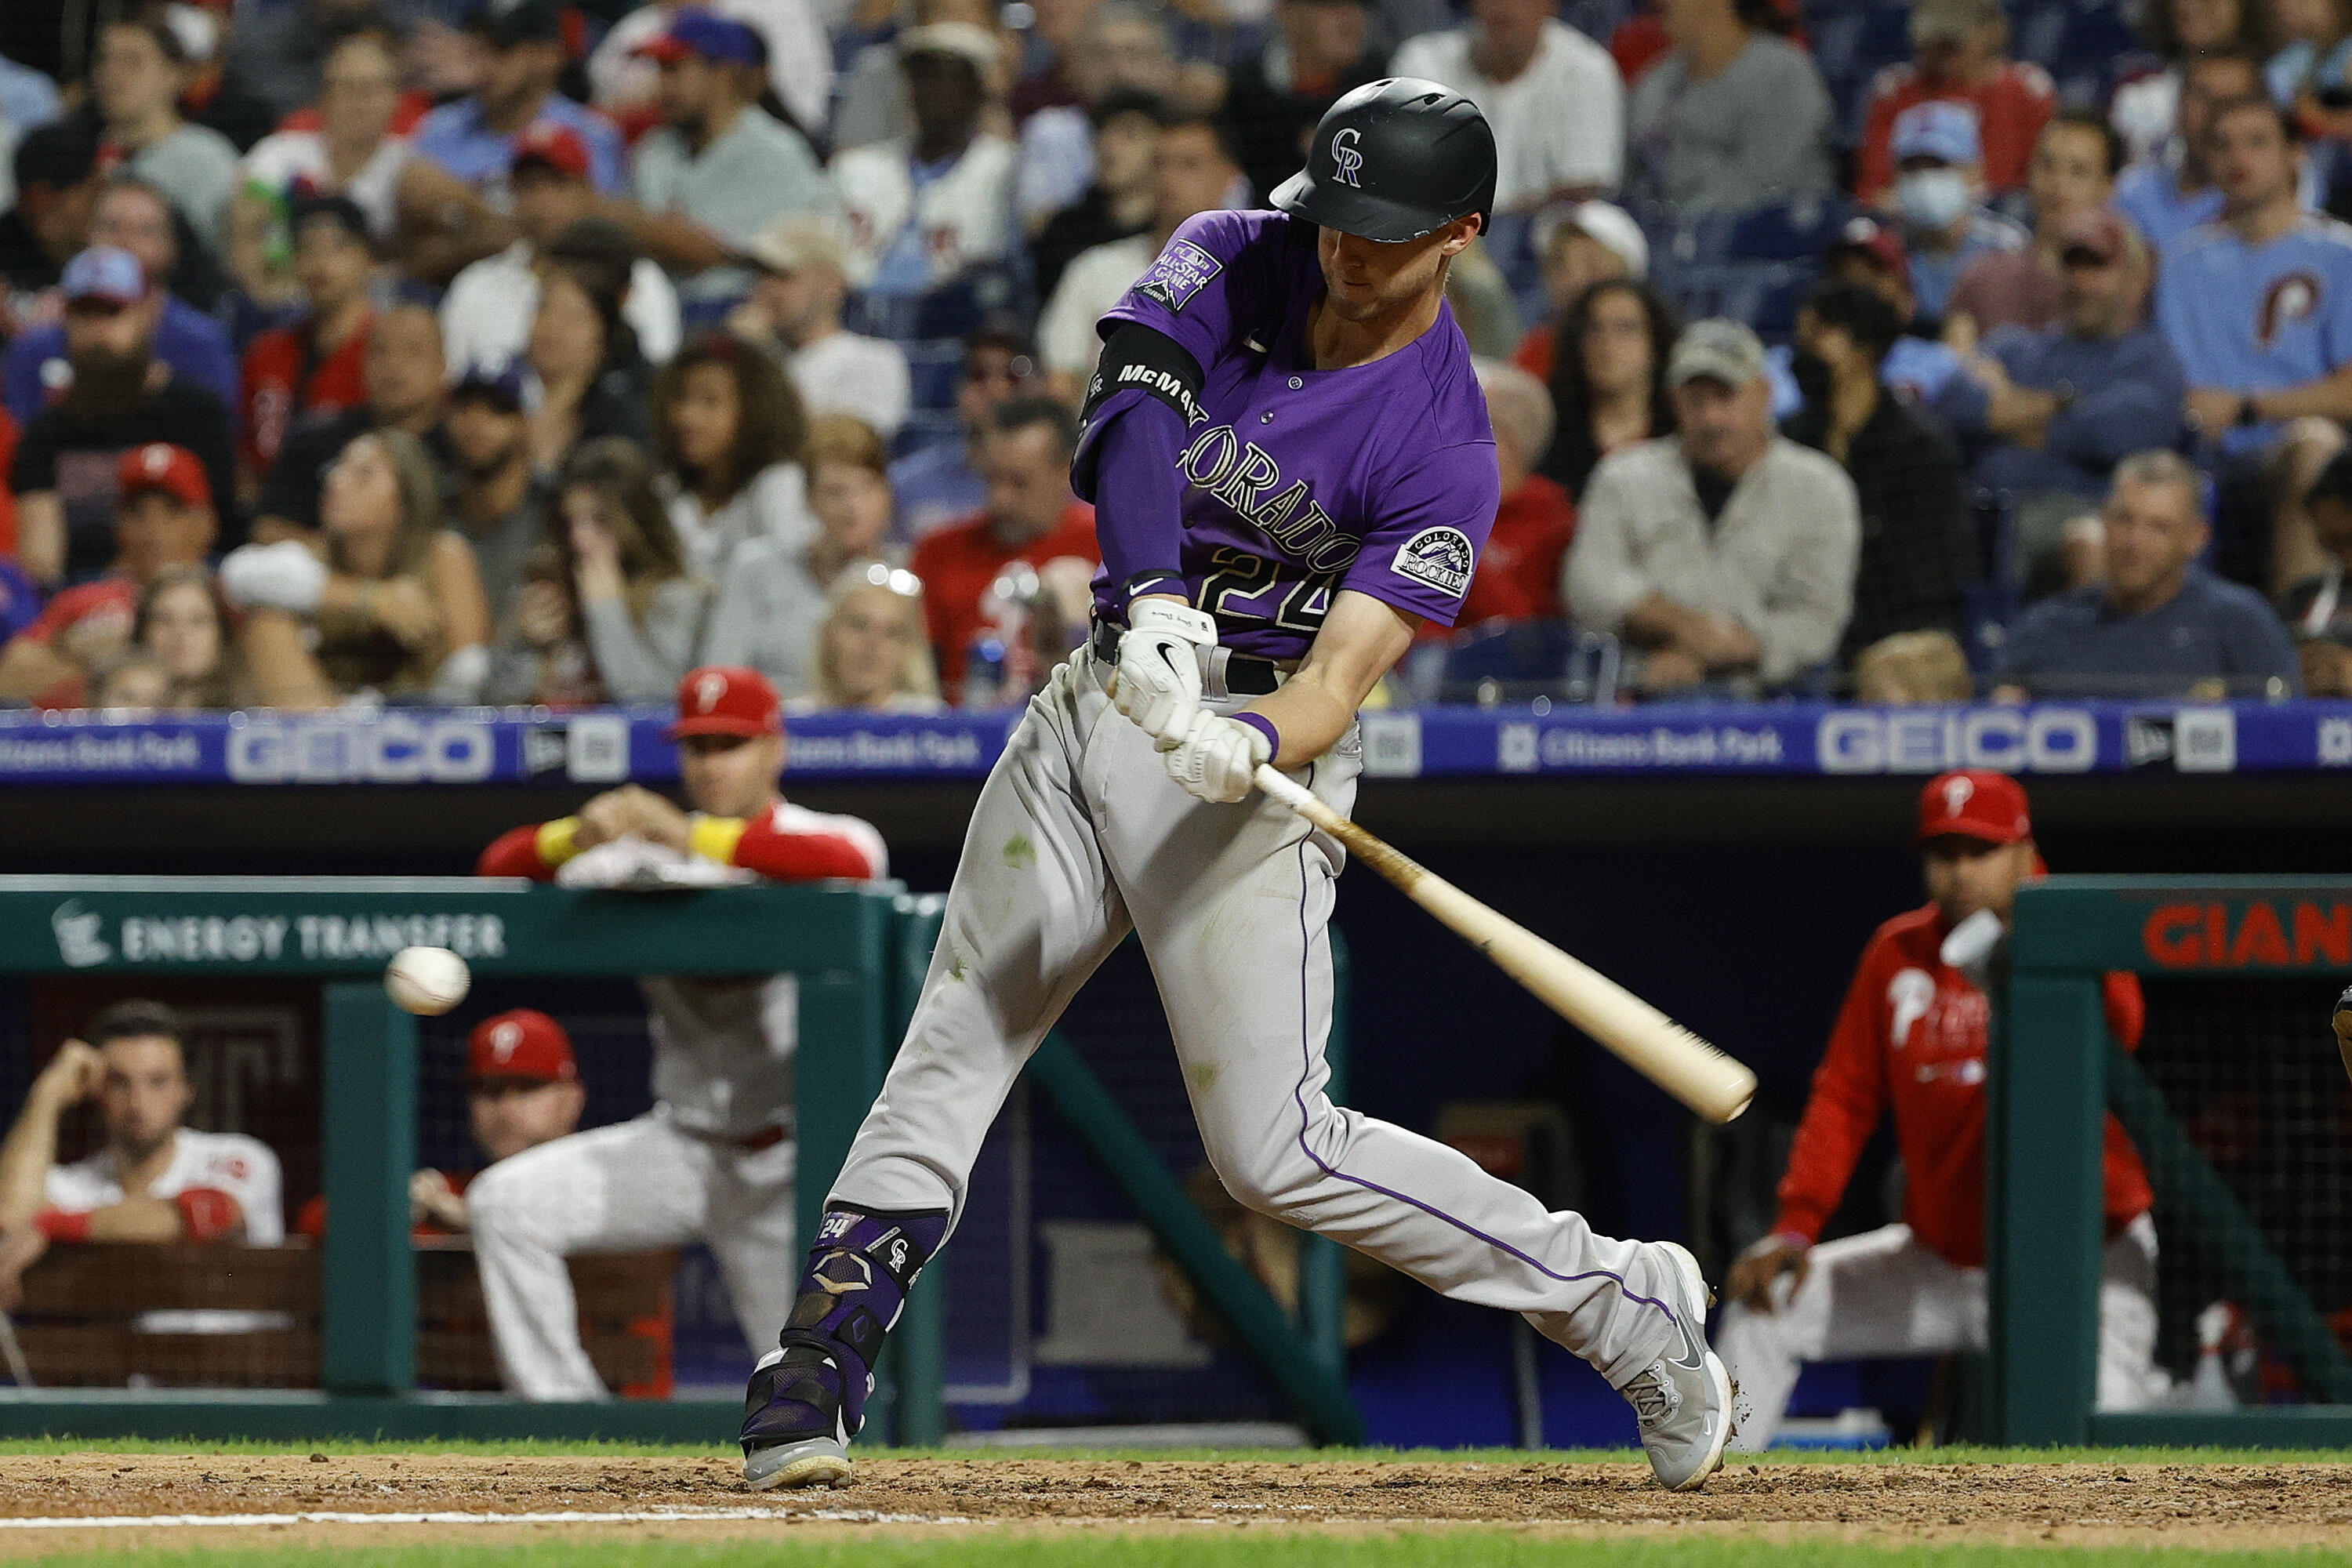 Colorado Rockies agree to minor league contract with first baseman